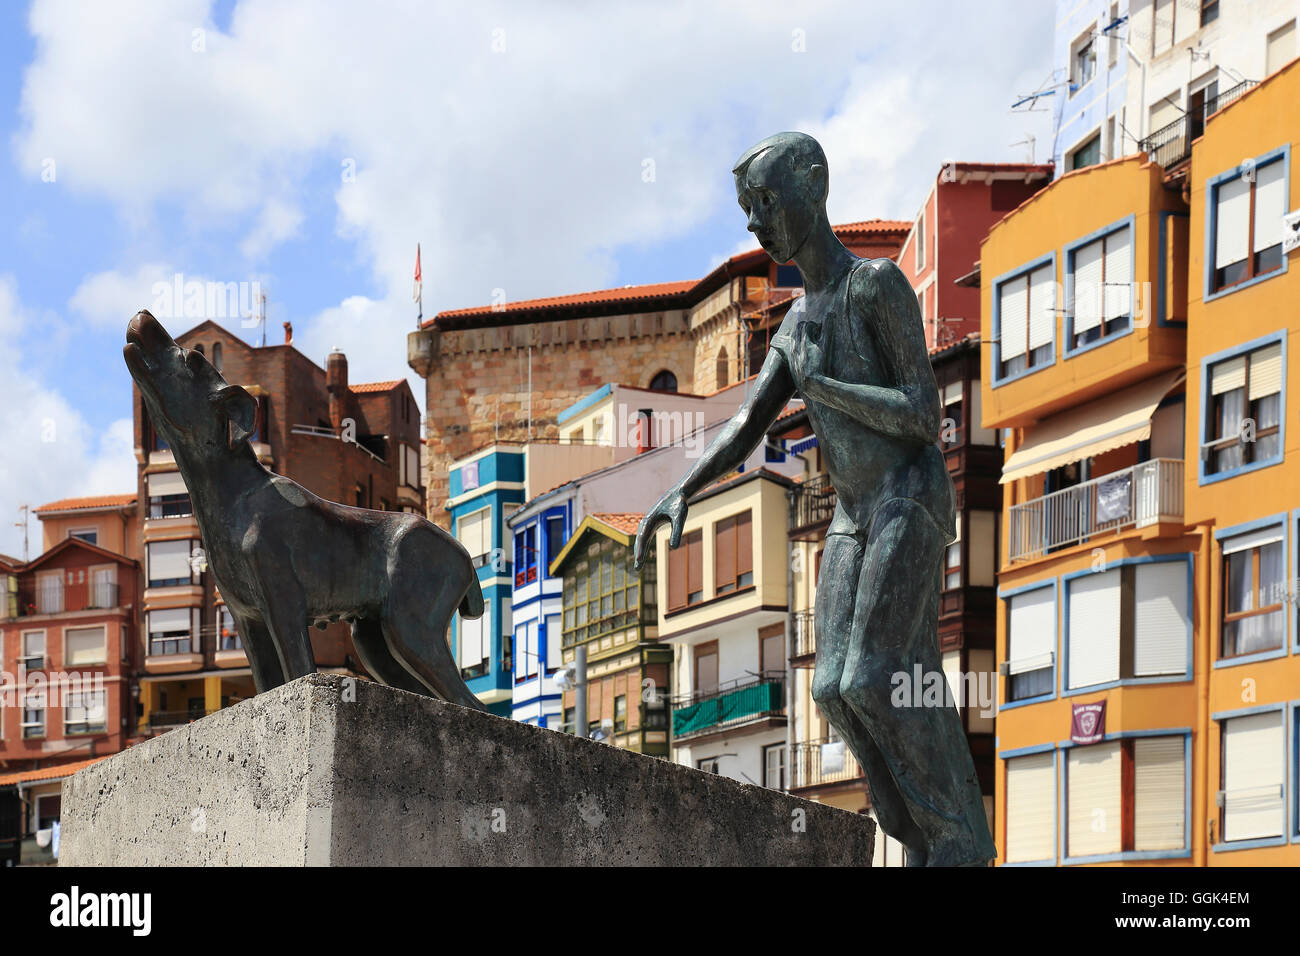 Sculpture in the harbour of Bermeo town, Spain, Basque County Stock Photo